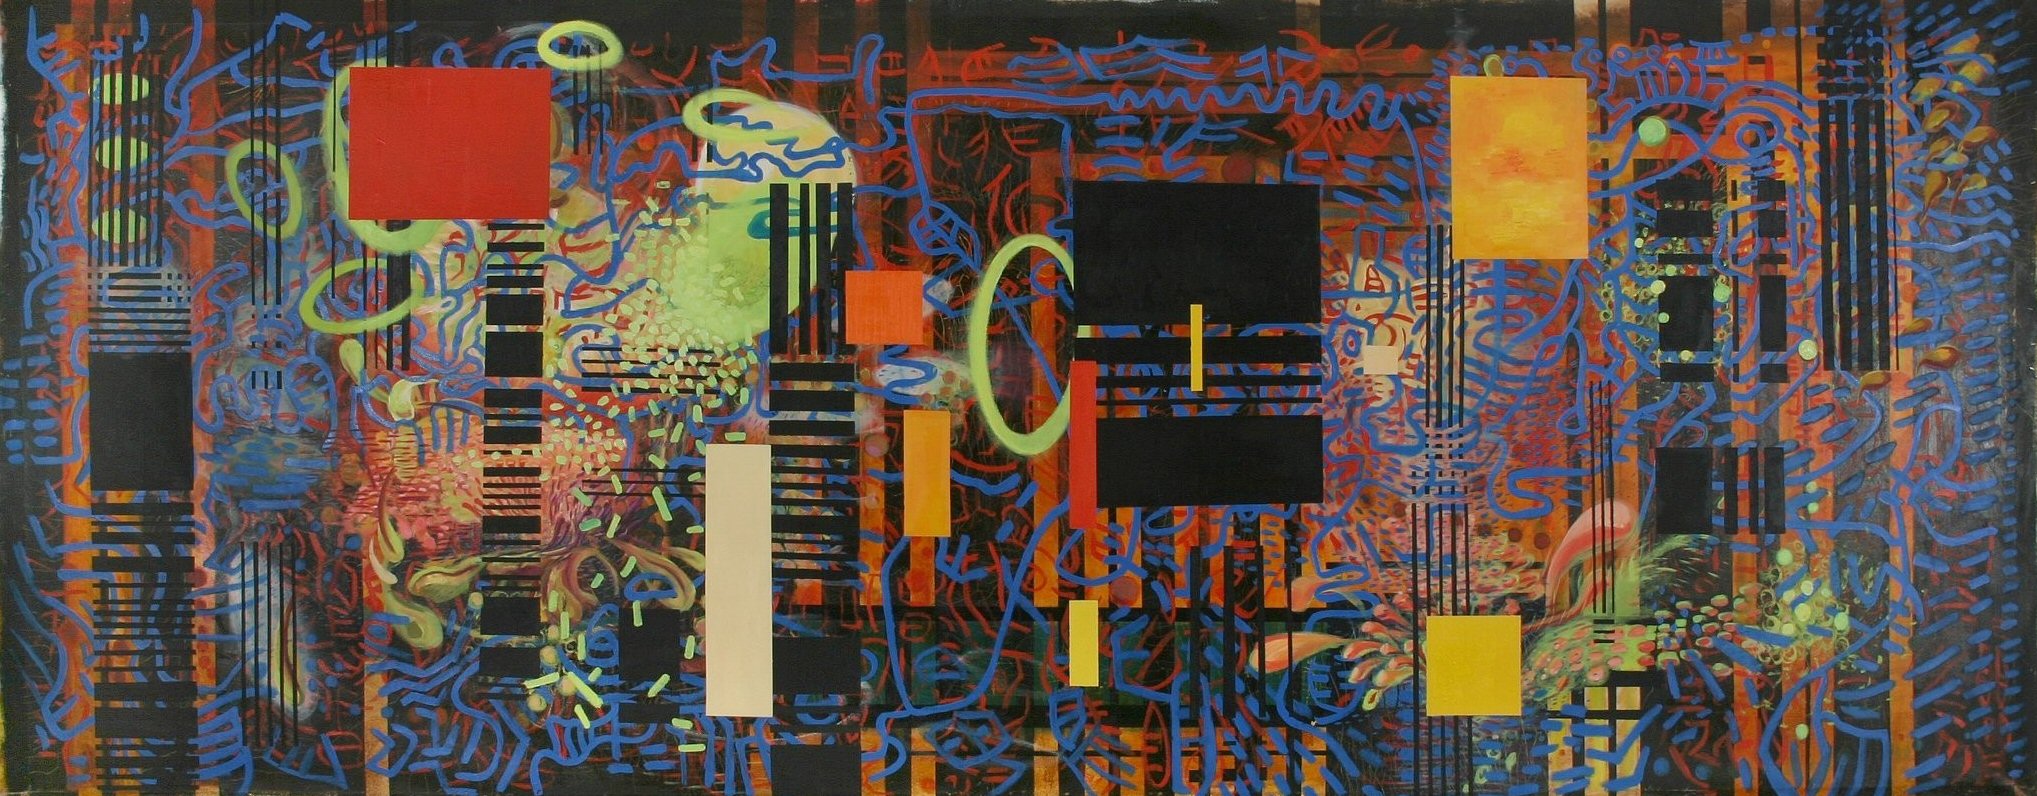 Garden Series II, 68 x 144 inches, Oil on Canvas, 2002-2010